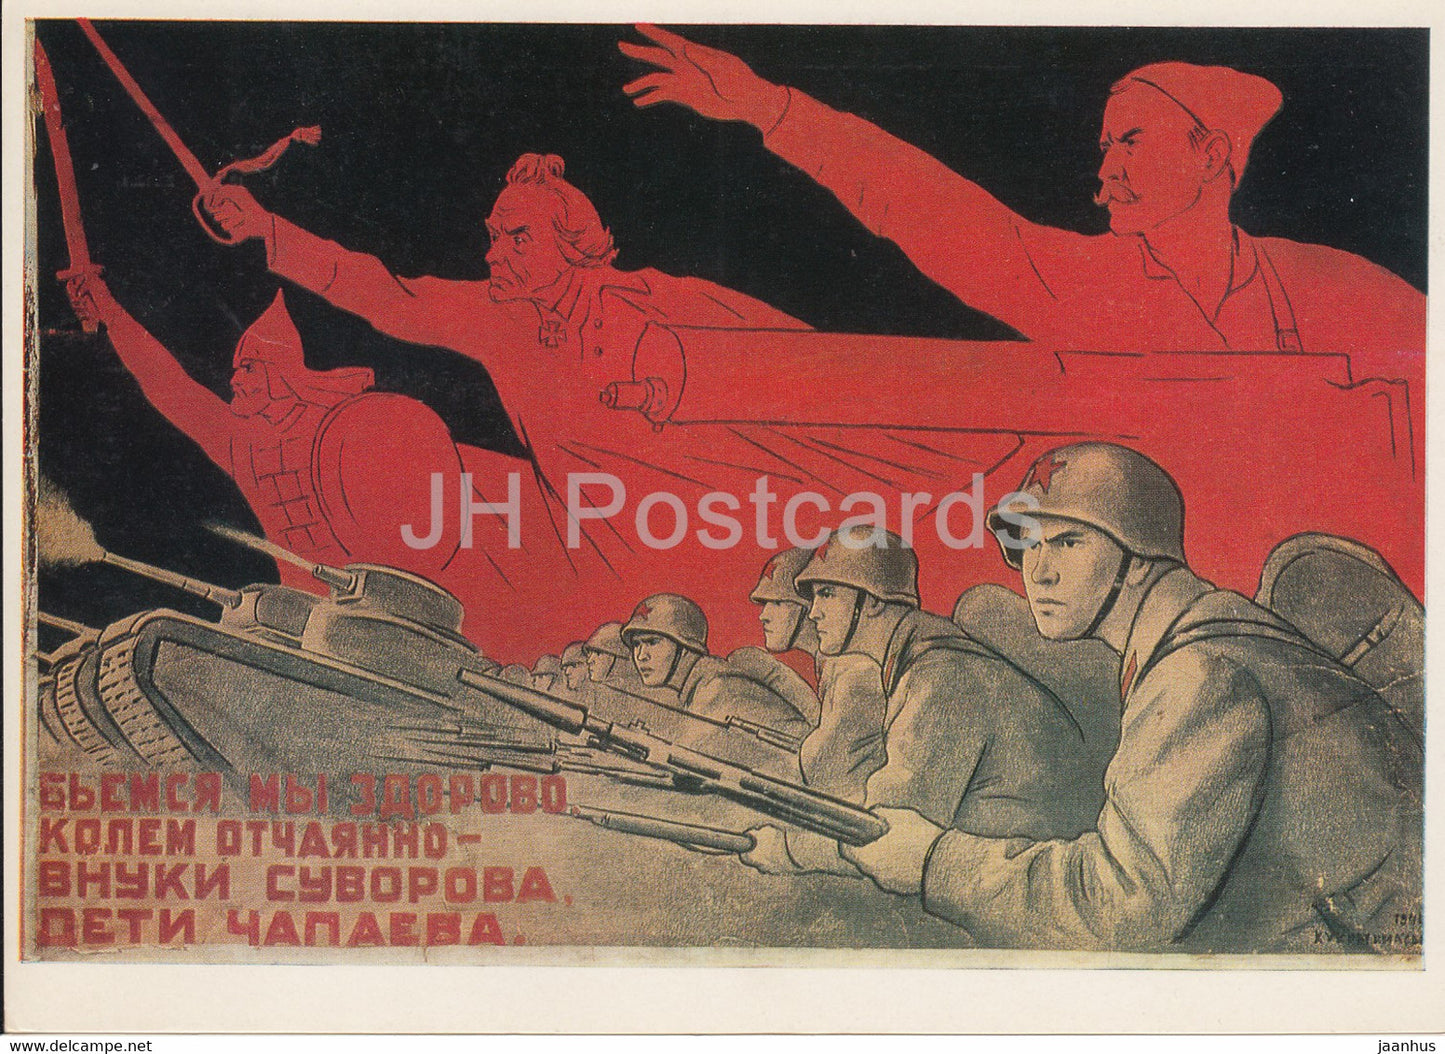 poster by Kukryniksy - We are fighting great - soldiers - tank - large format card - 1977 - Russia USSR - unused - JH Postcards